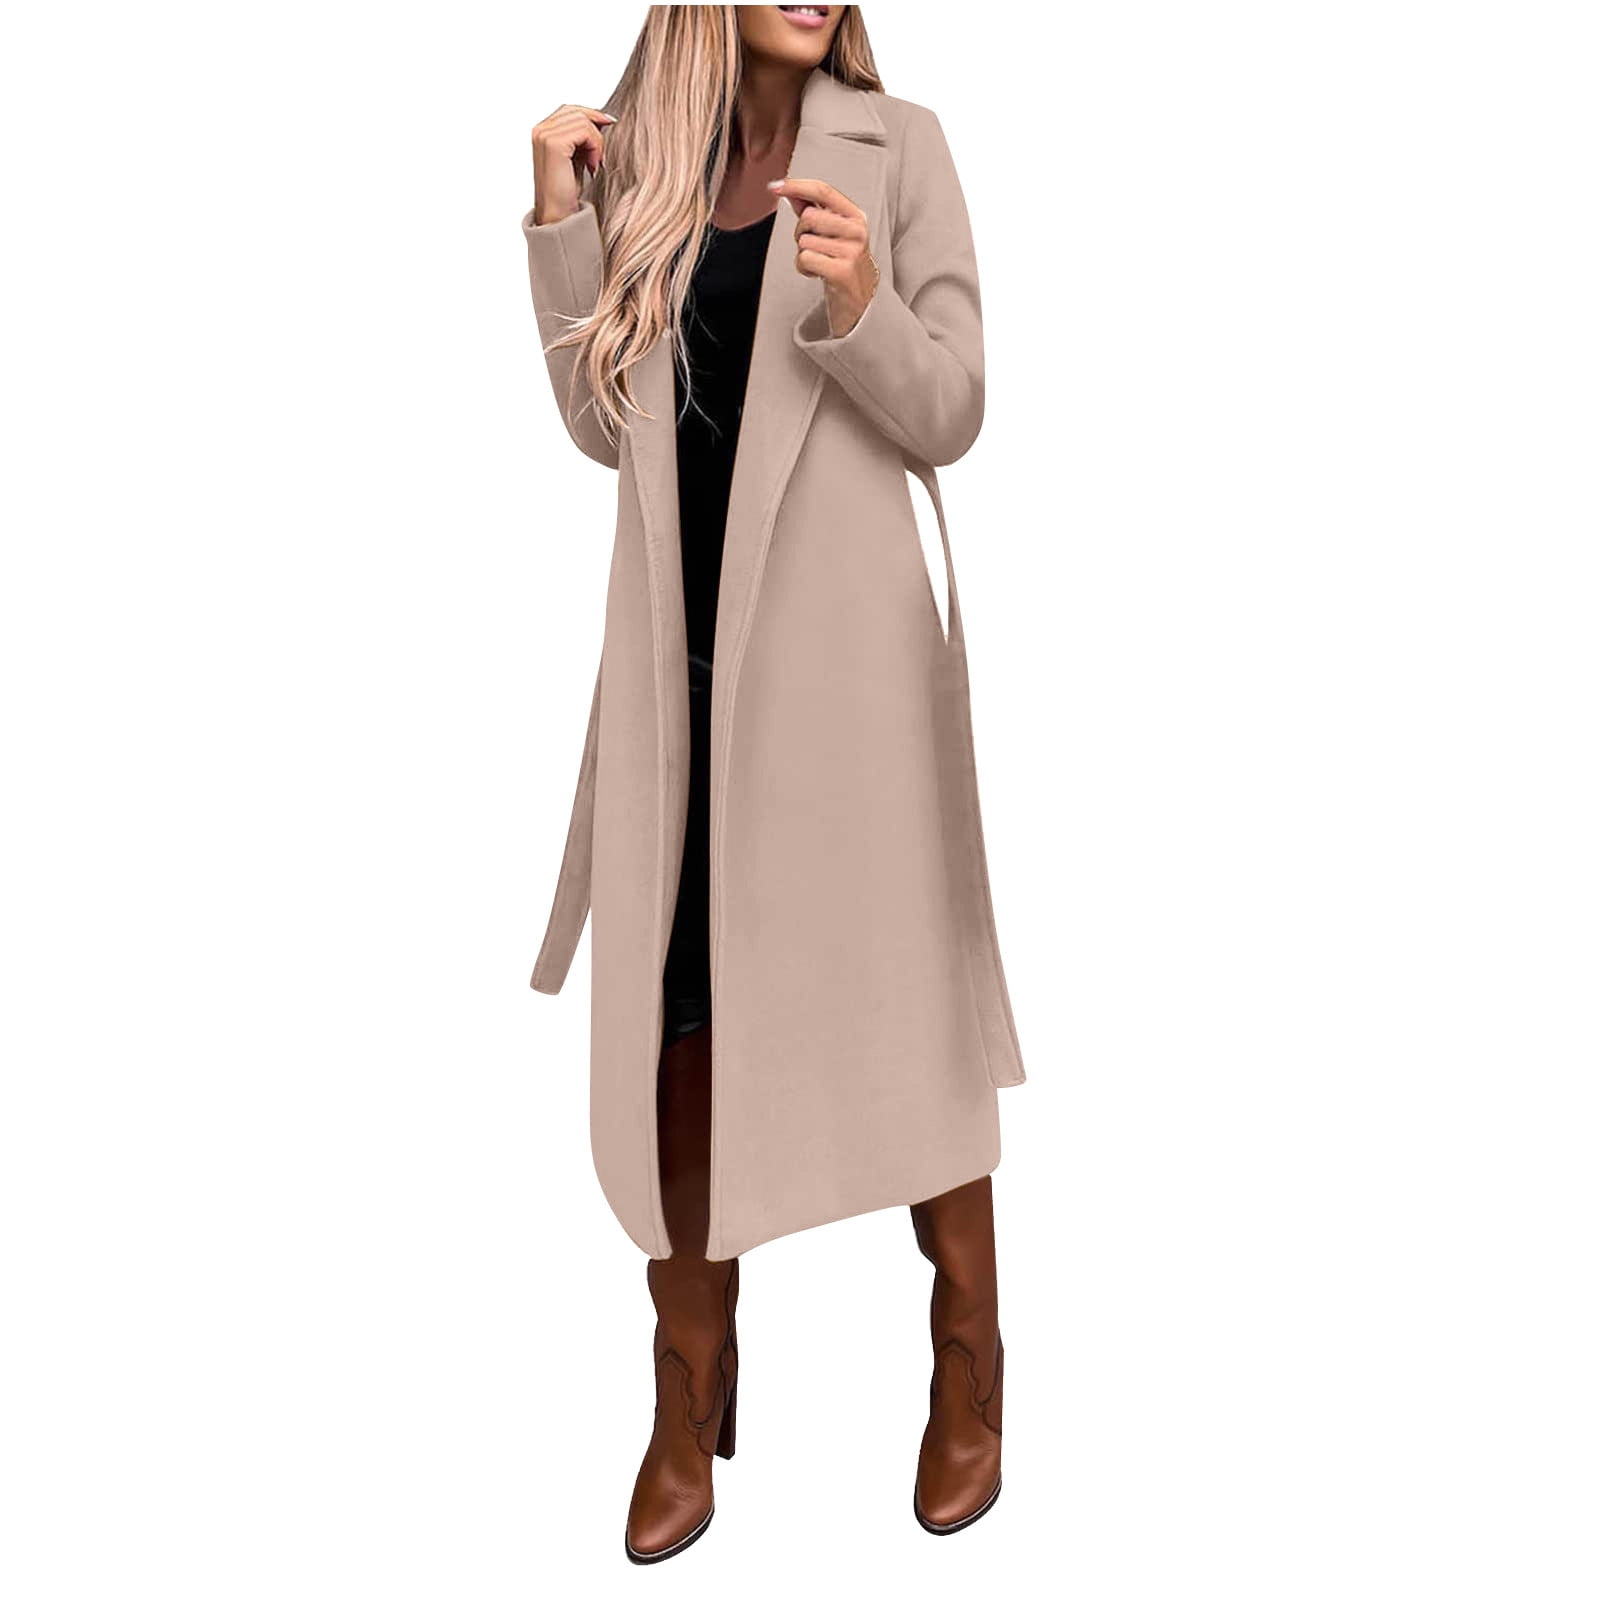 Hfyihgf Womens Classic Faux Wool Coat Lapel Collar Thin Trench Coats Open  Front Belted Slim Long Jacket（Beige,S)